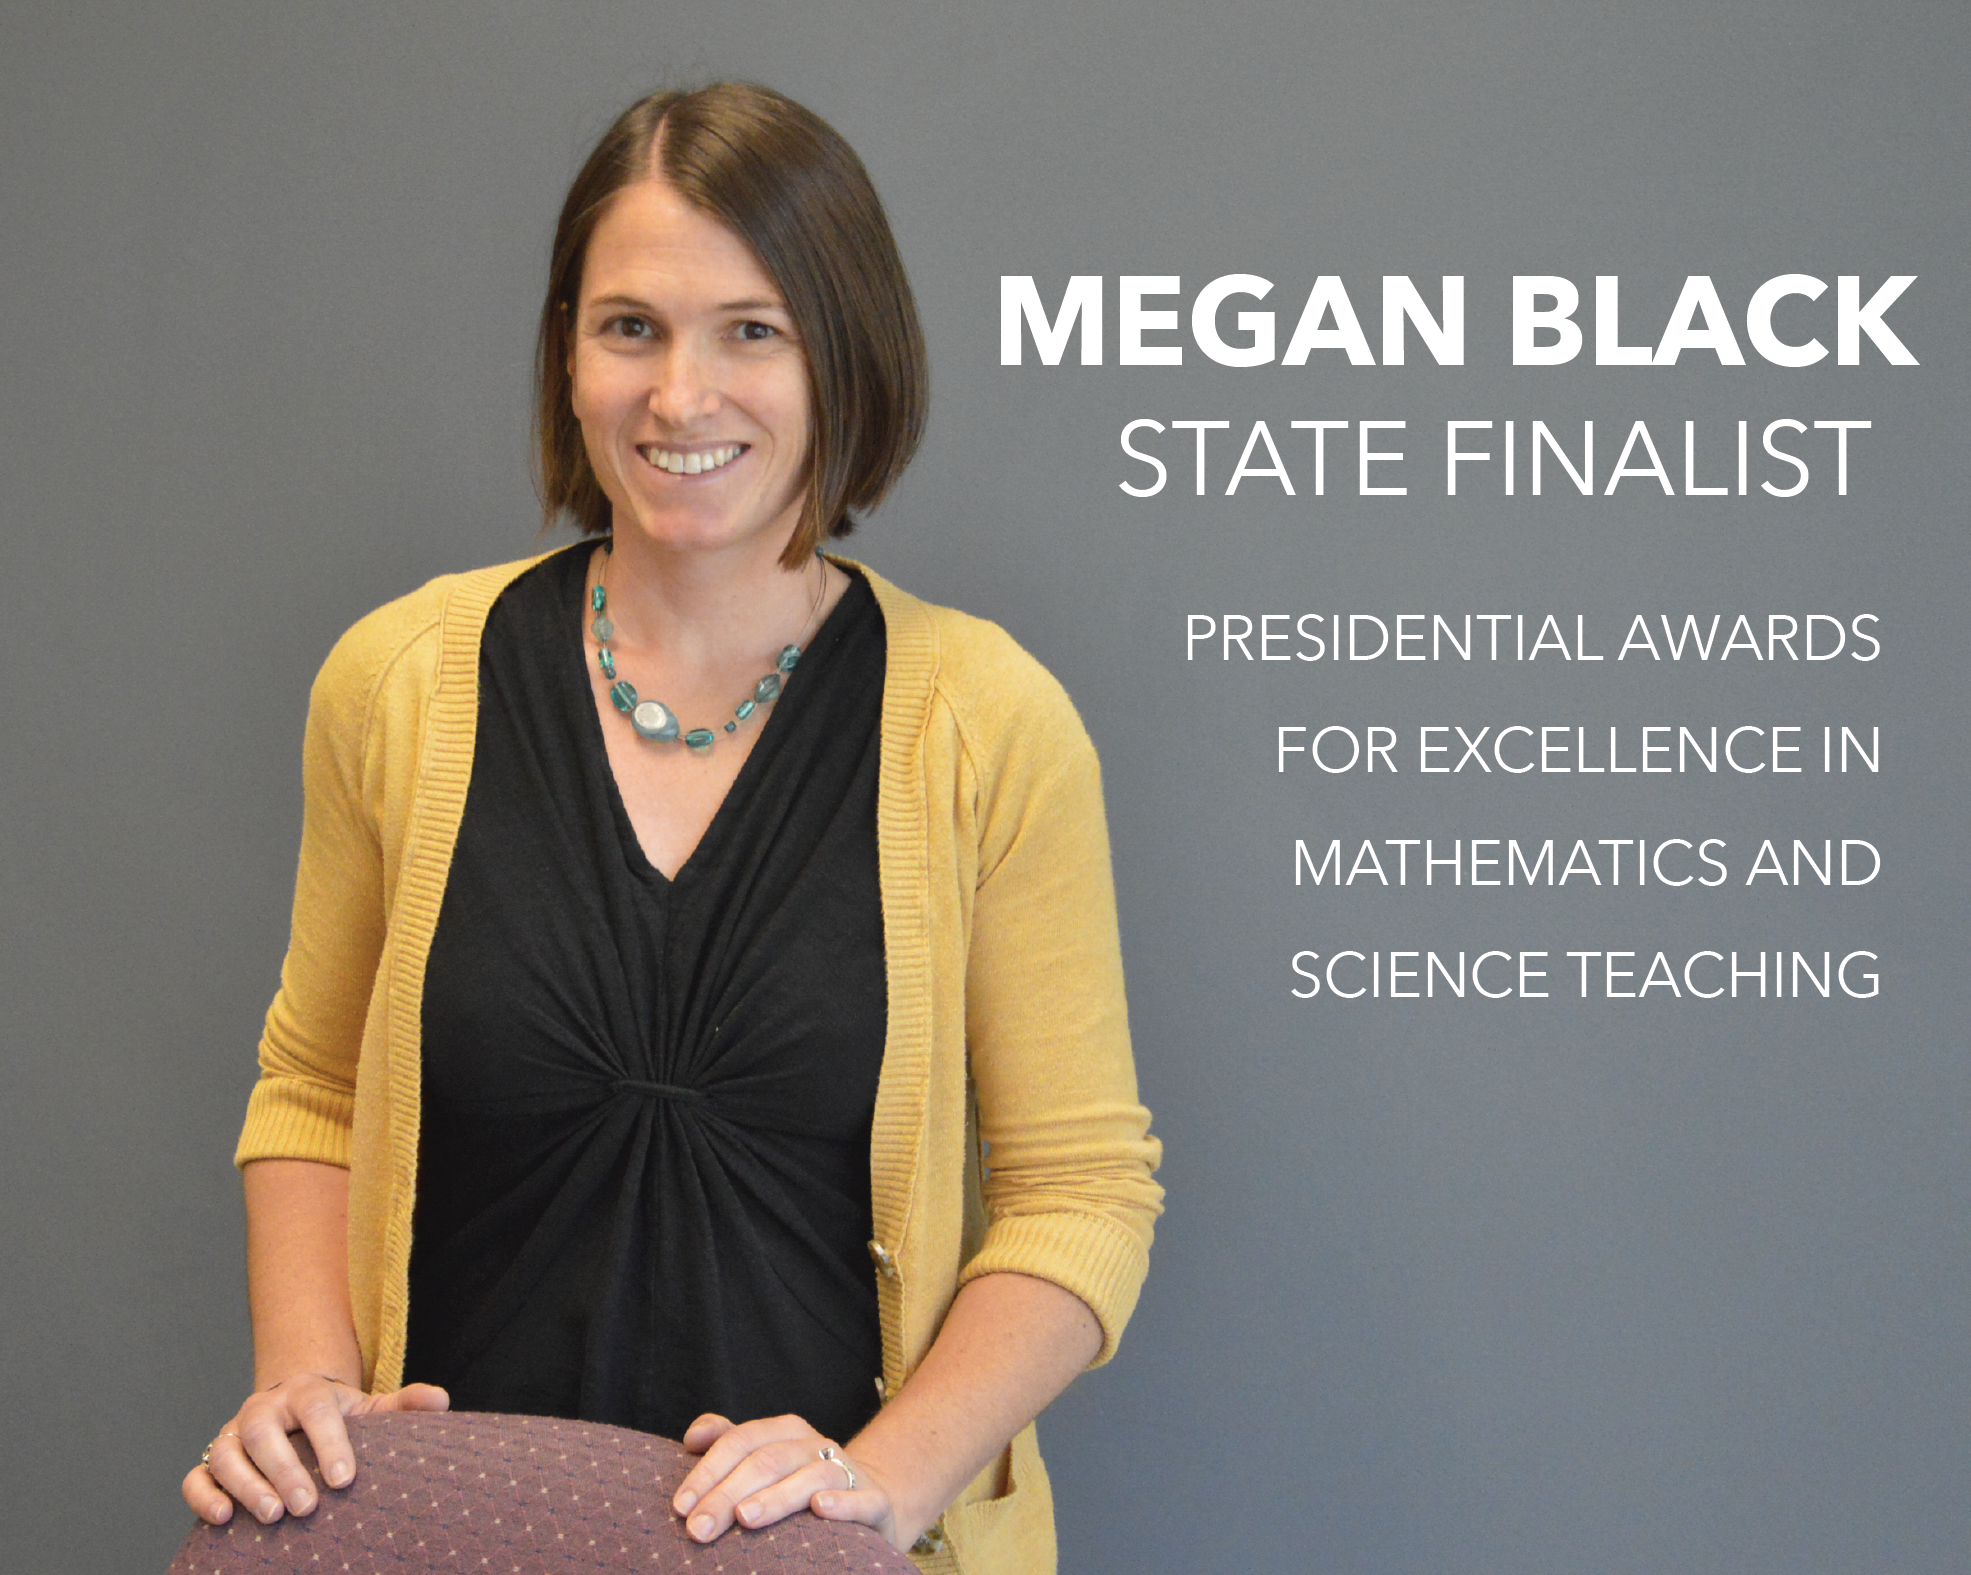 Granite science specialist selected as finalist for Presidential Award for Excellence in Math and Science Teaching